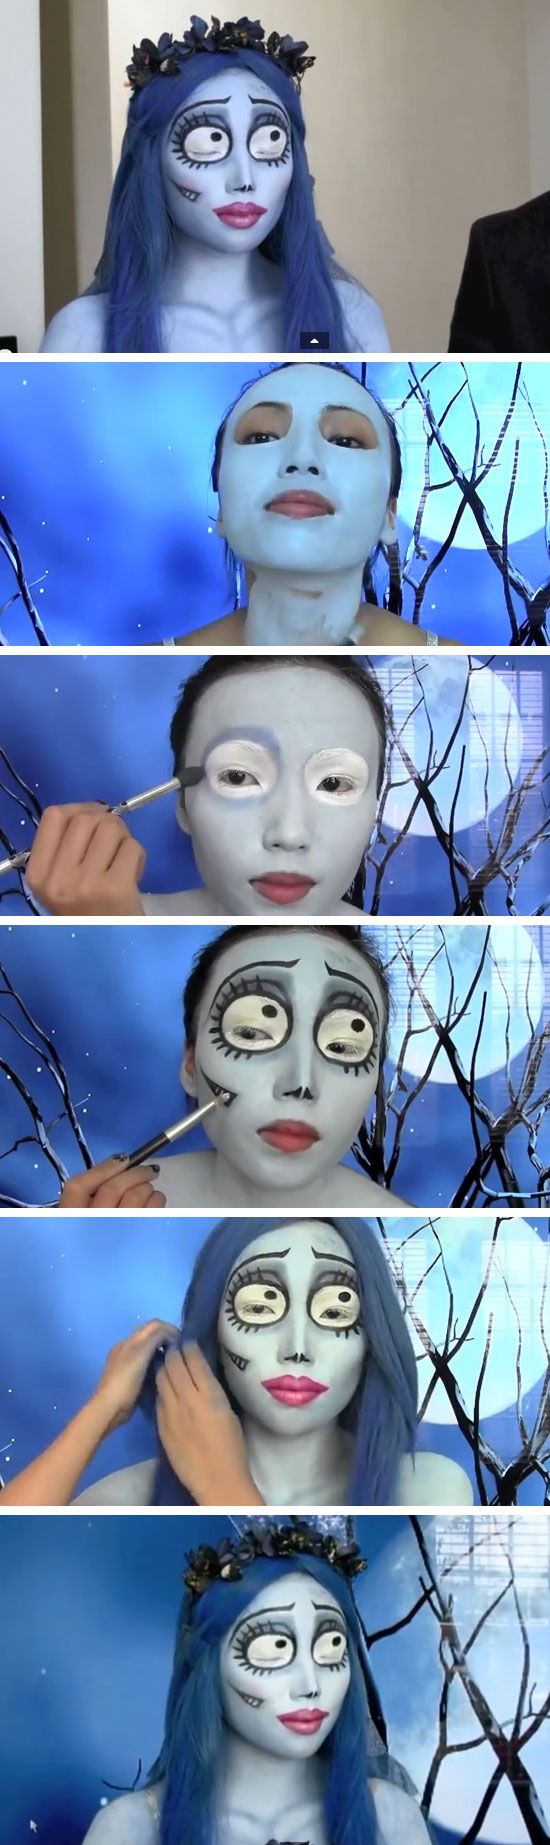 25+ Super Cool Step by Step Makeup Tutorials for Halloween - Hative